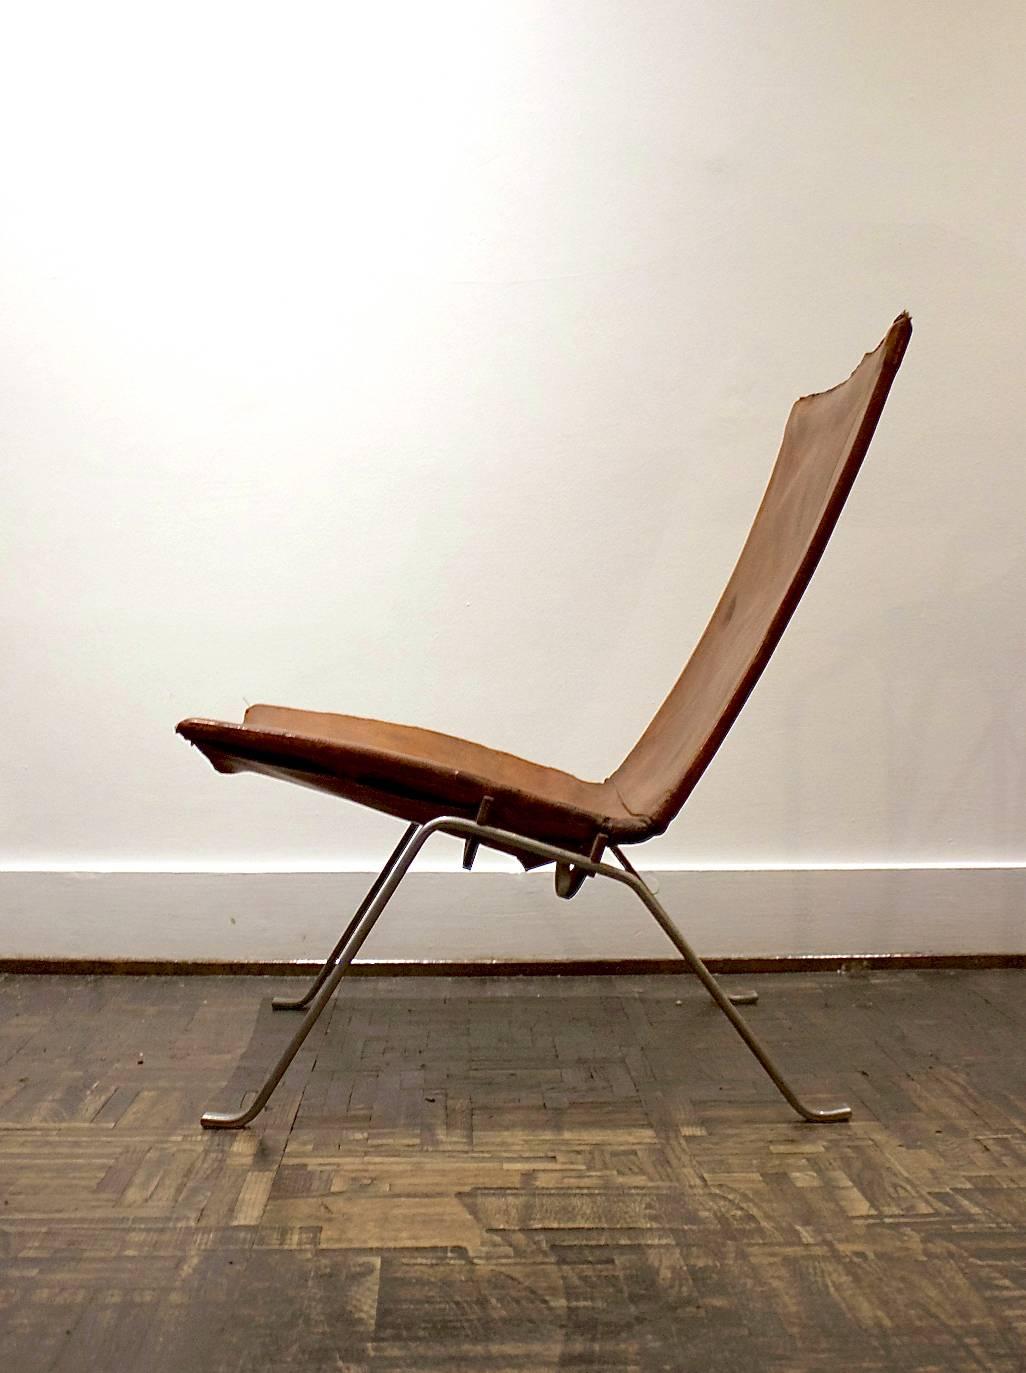 An early example of Poul Kjaerholm's 1956 design, model PK22. This piece, manufactured by E Kold Christensen, has the original nickel-plated steel frame and tan leather. 

The chair shows a highly developed patina to both the leather and the